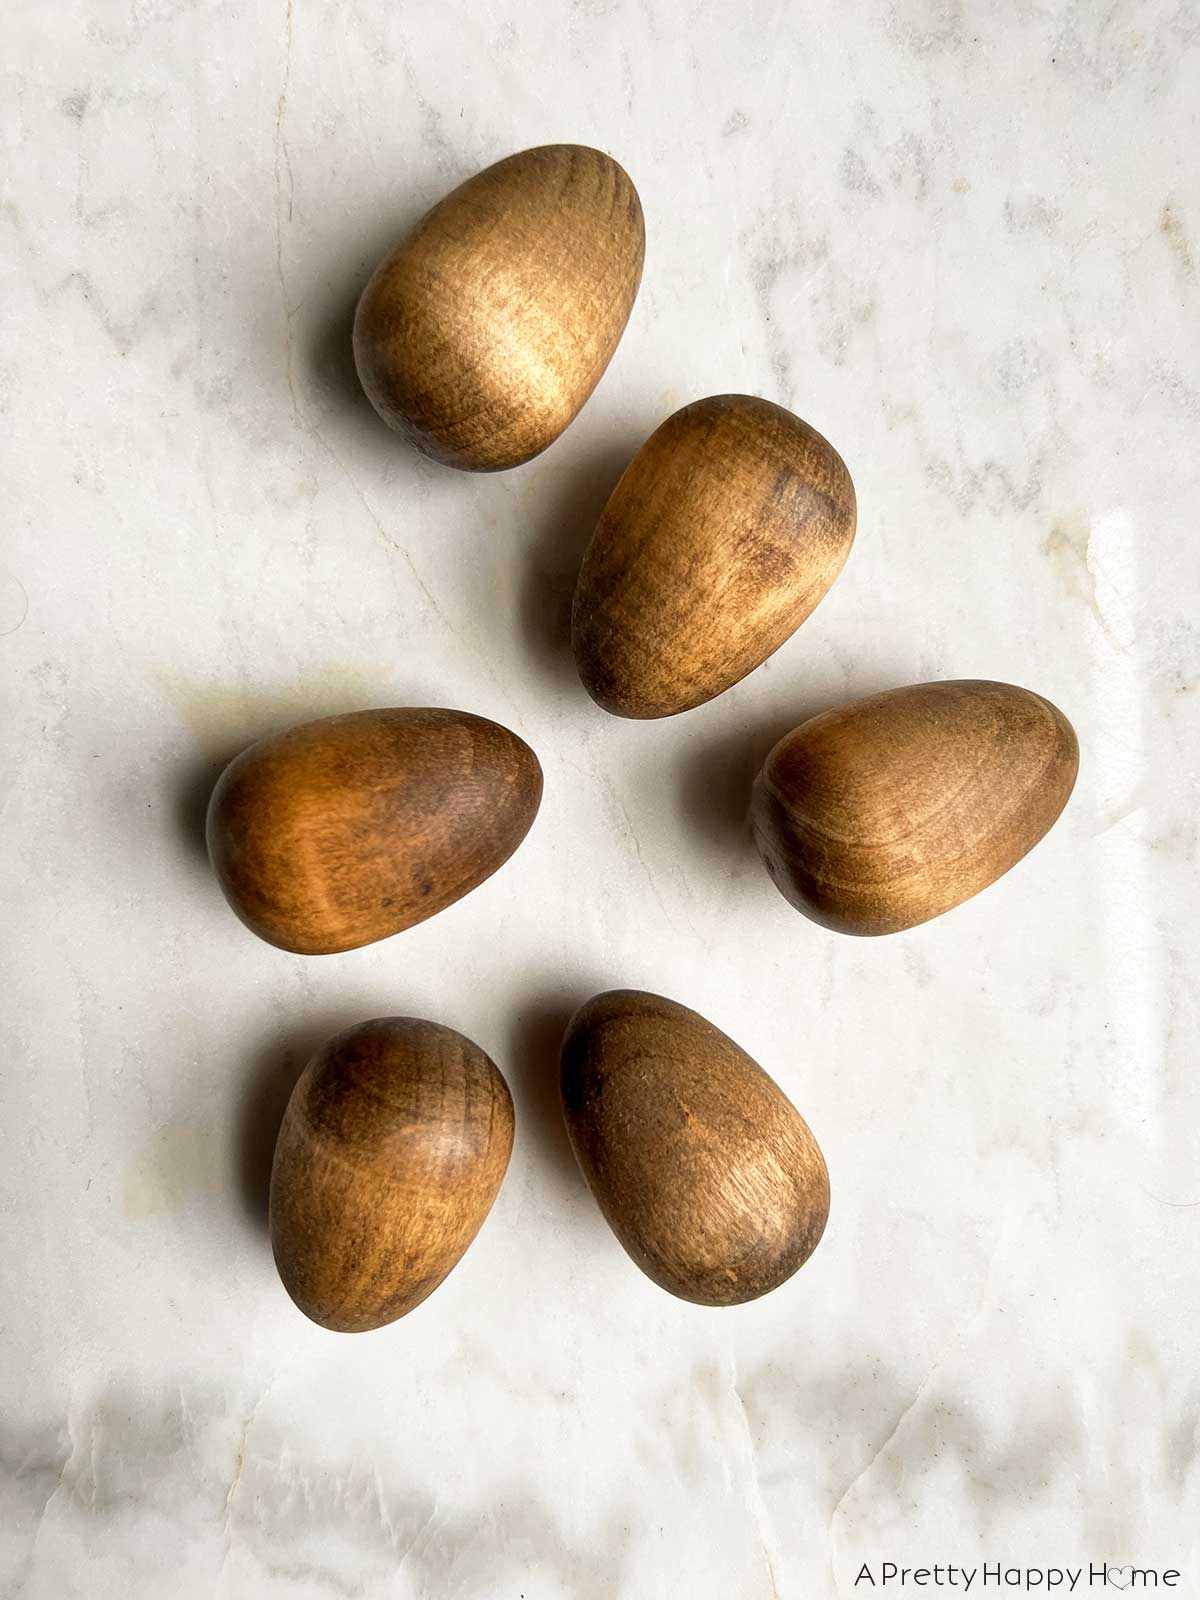 7 Ways To Decorate Wood Easter Eggs decorate wood eggs with stain and keep them natural looking